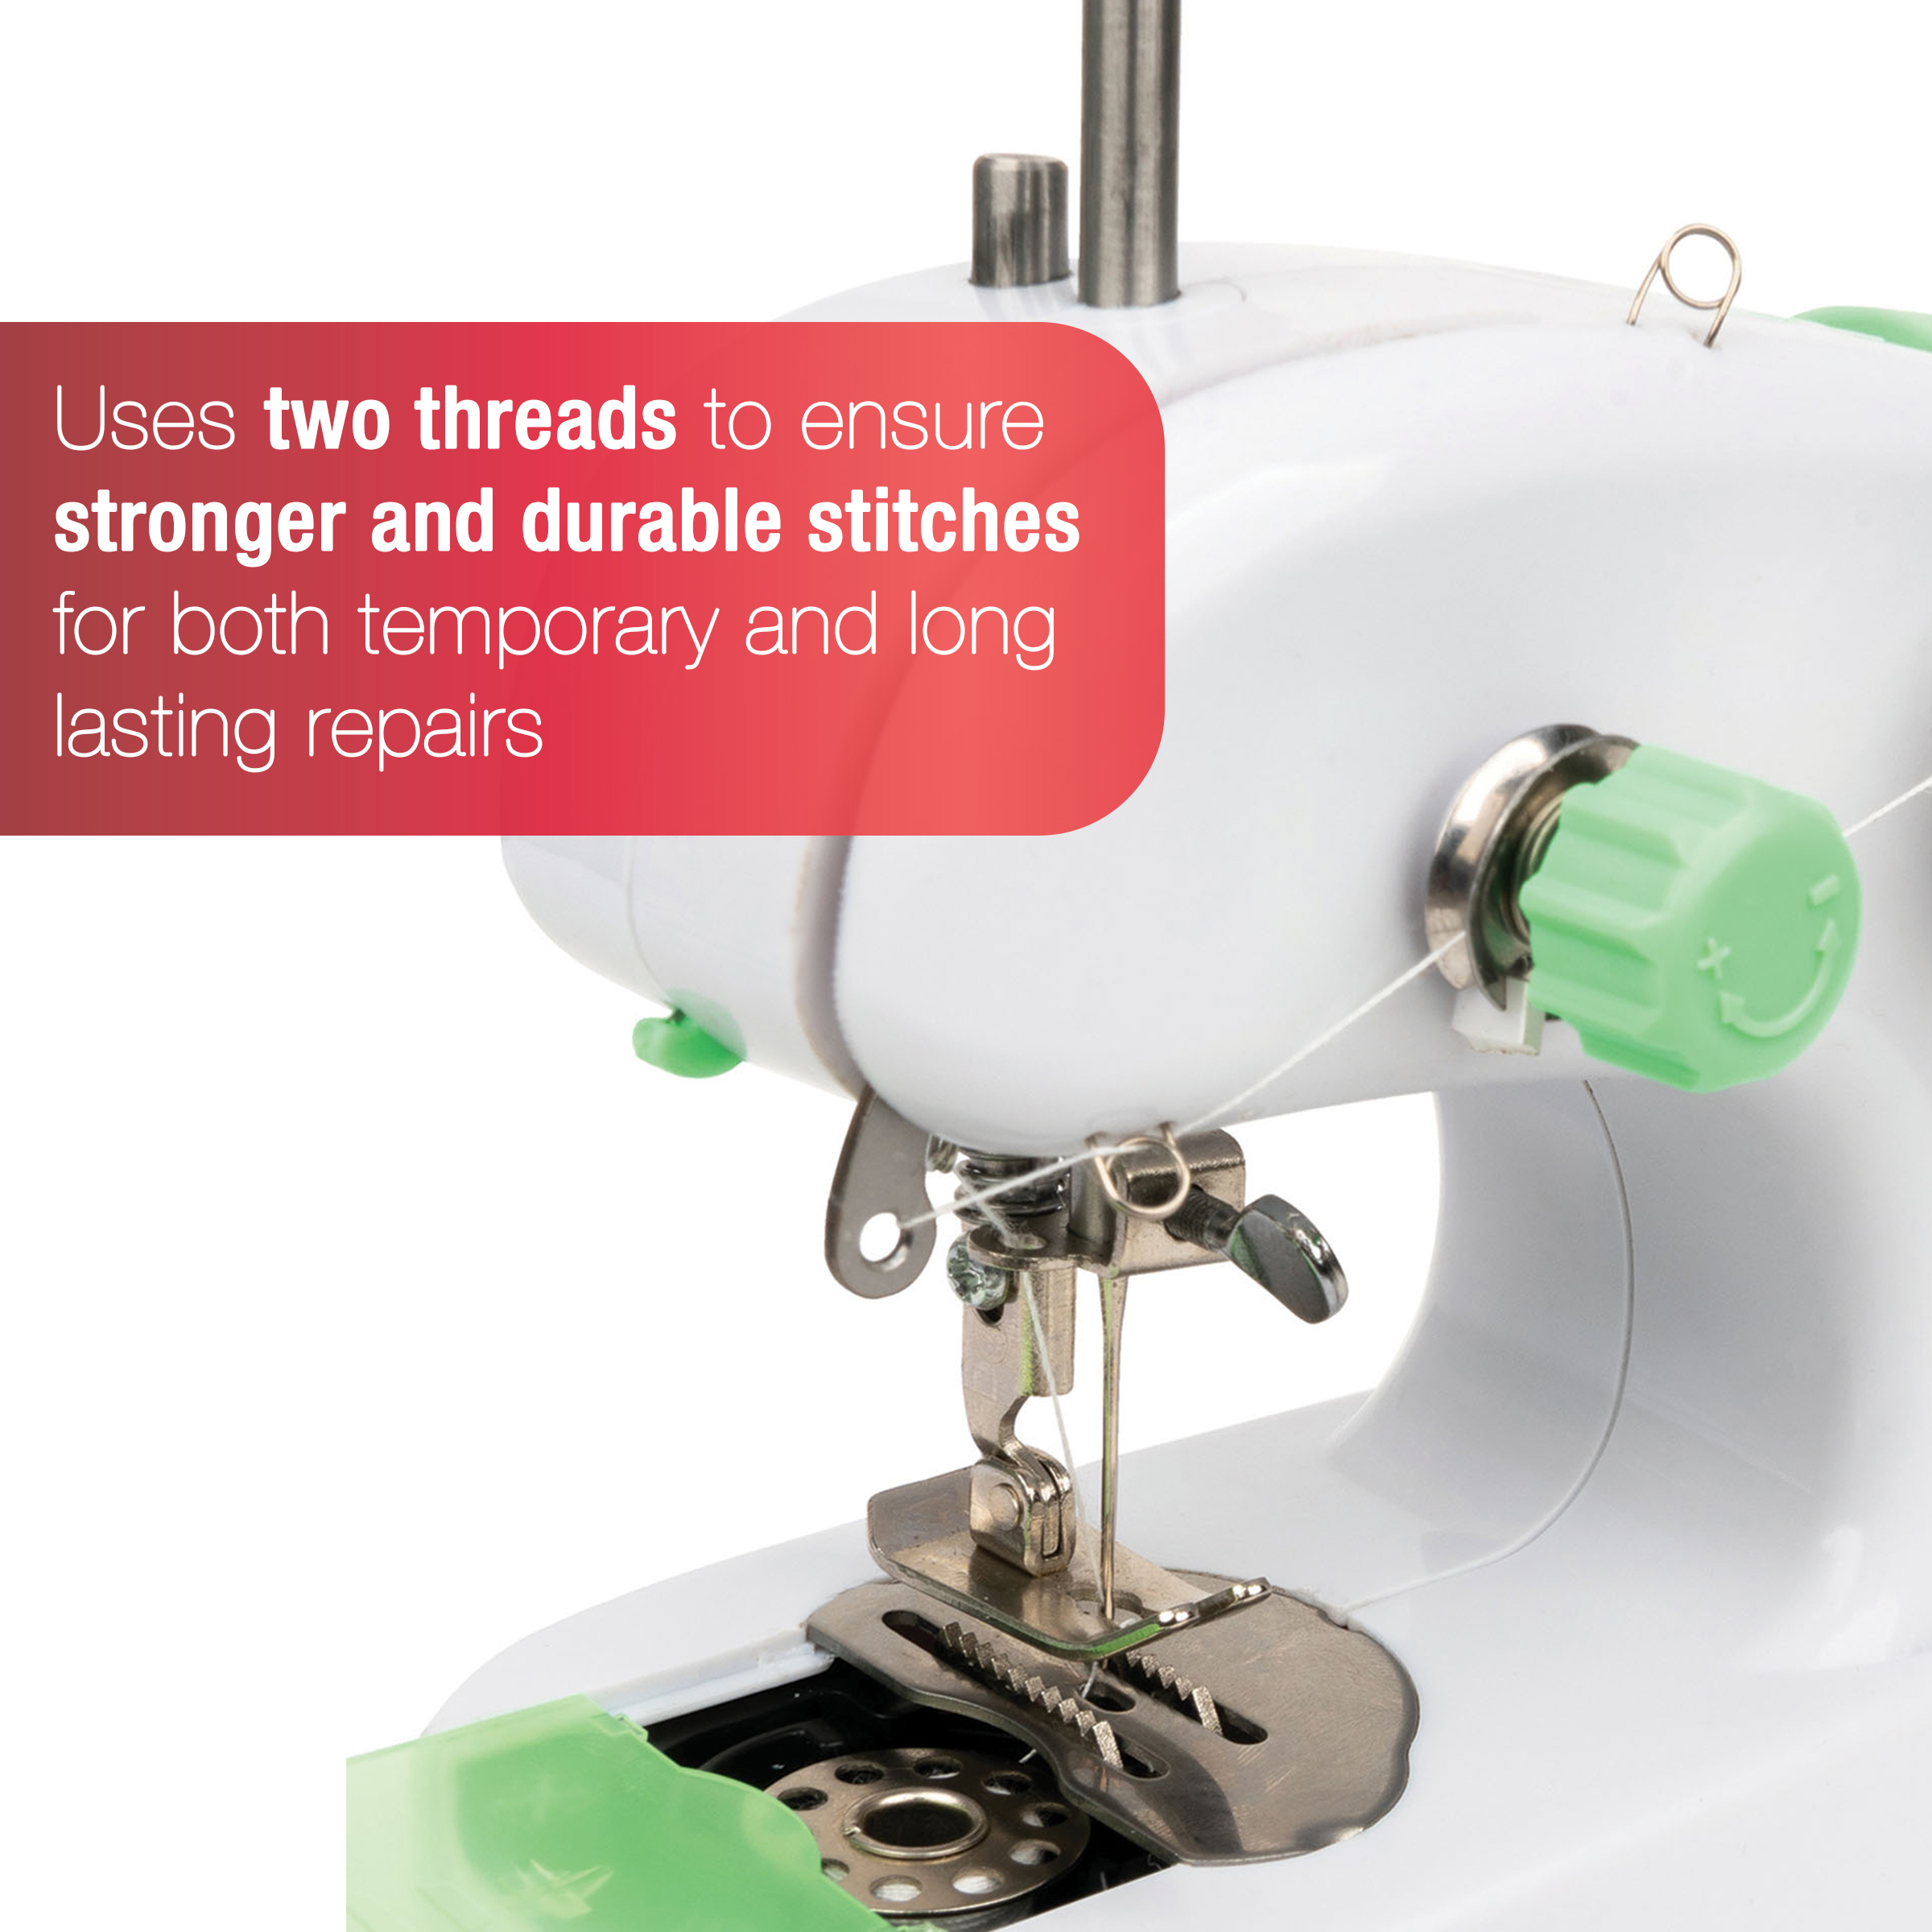 SINGER Stitch Quick Plus Cordless Hand Held Mending Portable Sewing Machine, Two Thread - image 7 of 14